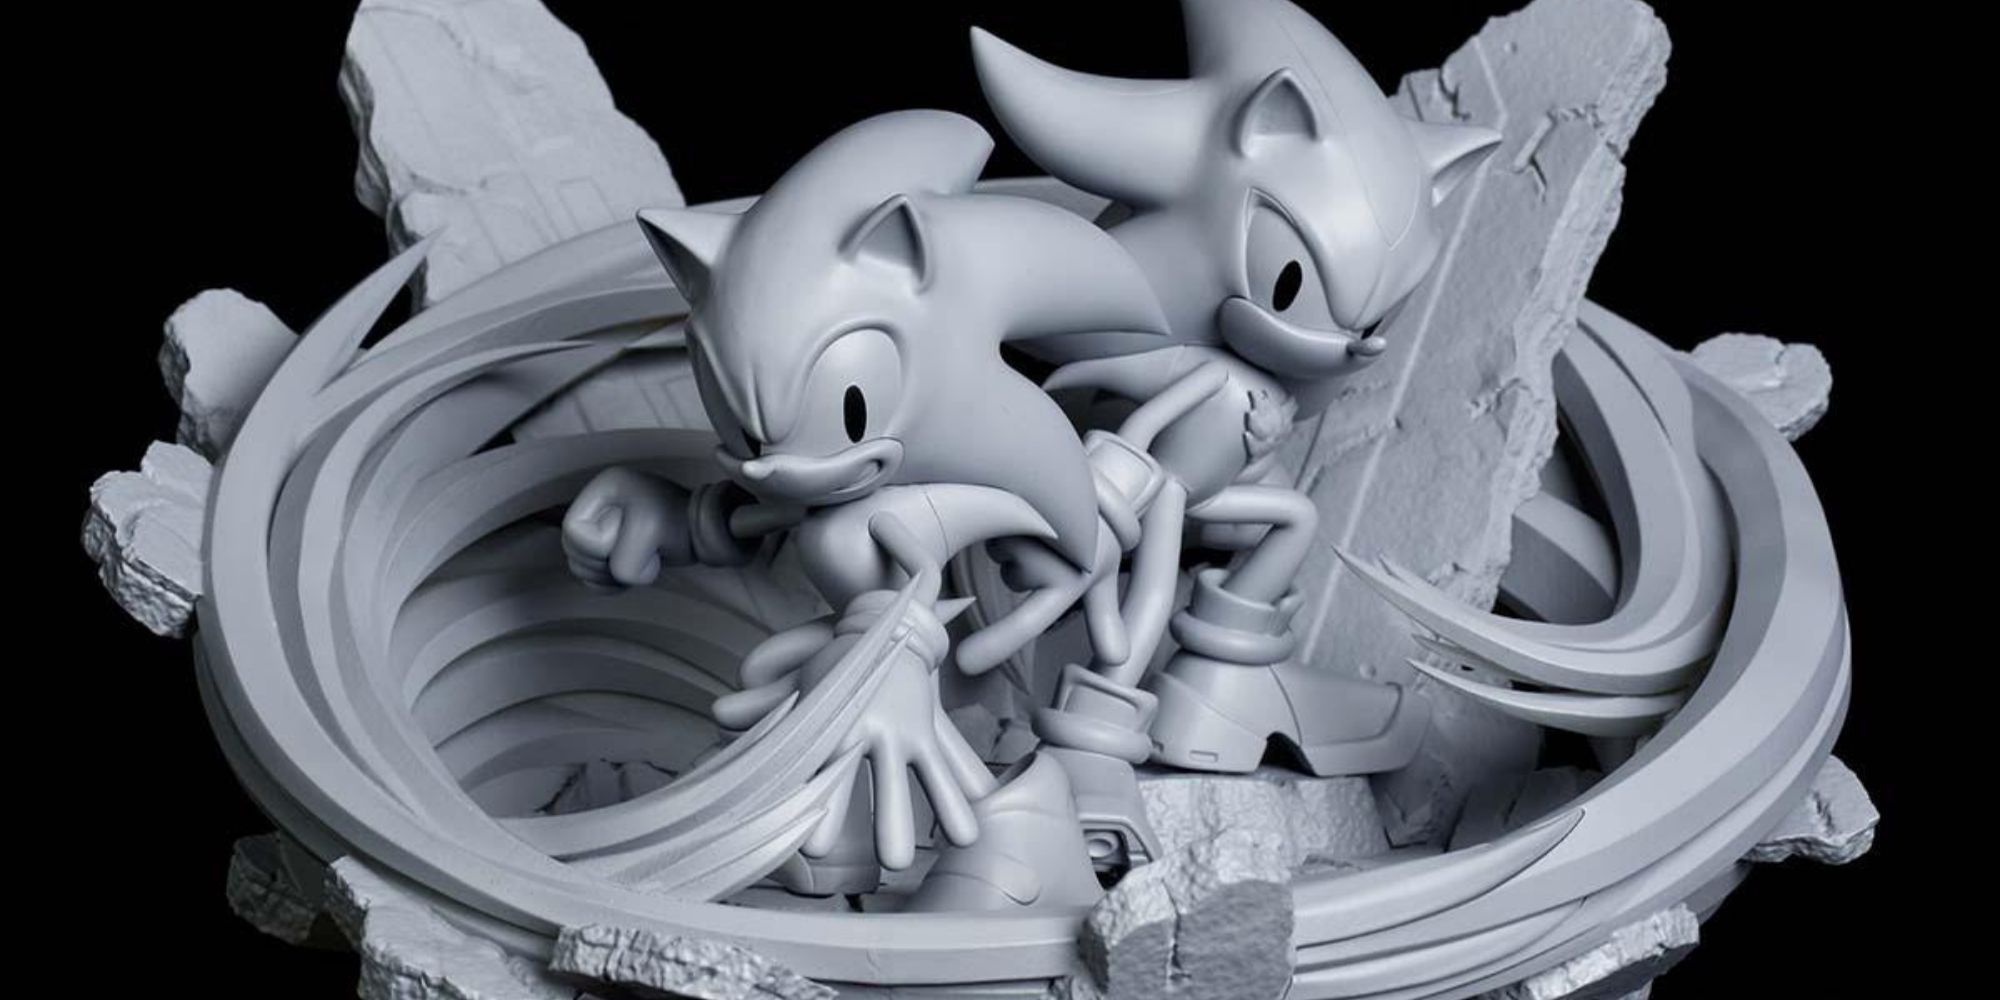 Sonic Adventure 2 Sonic & Shadow Figure Available For Pre-Order